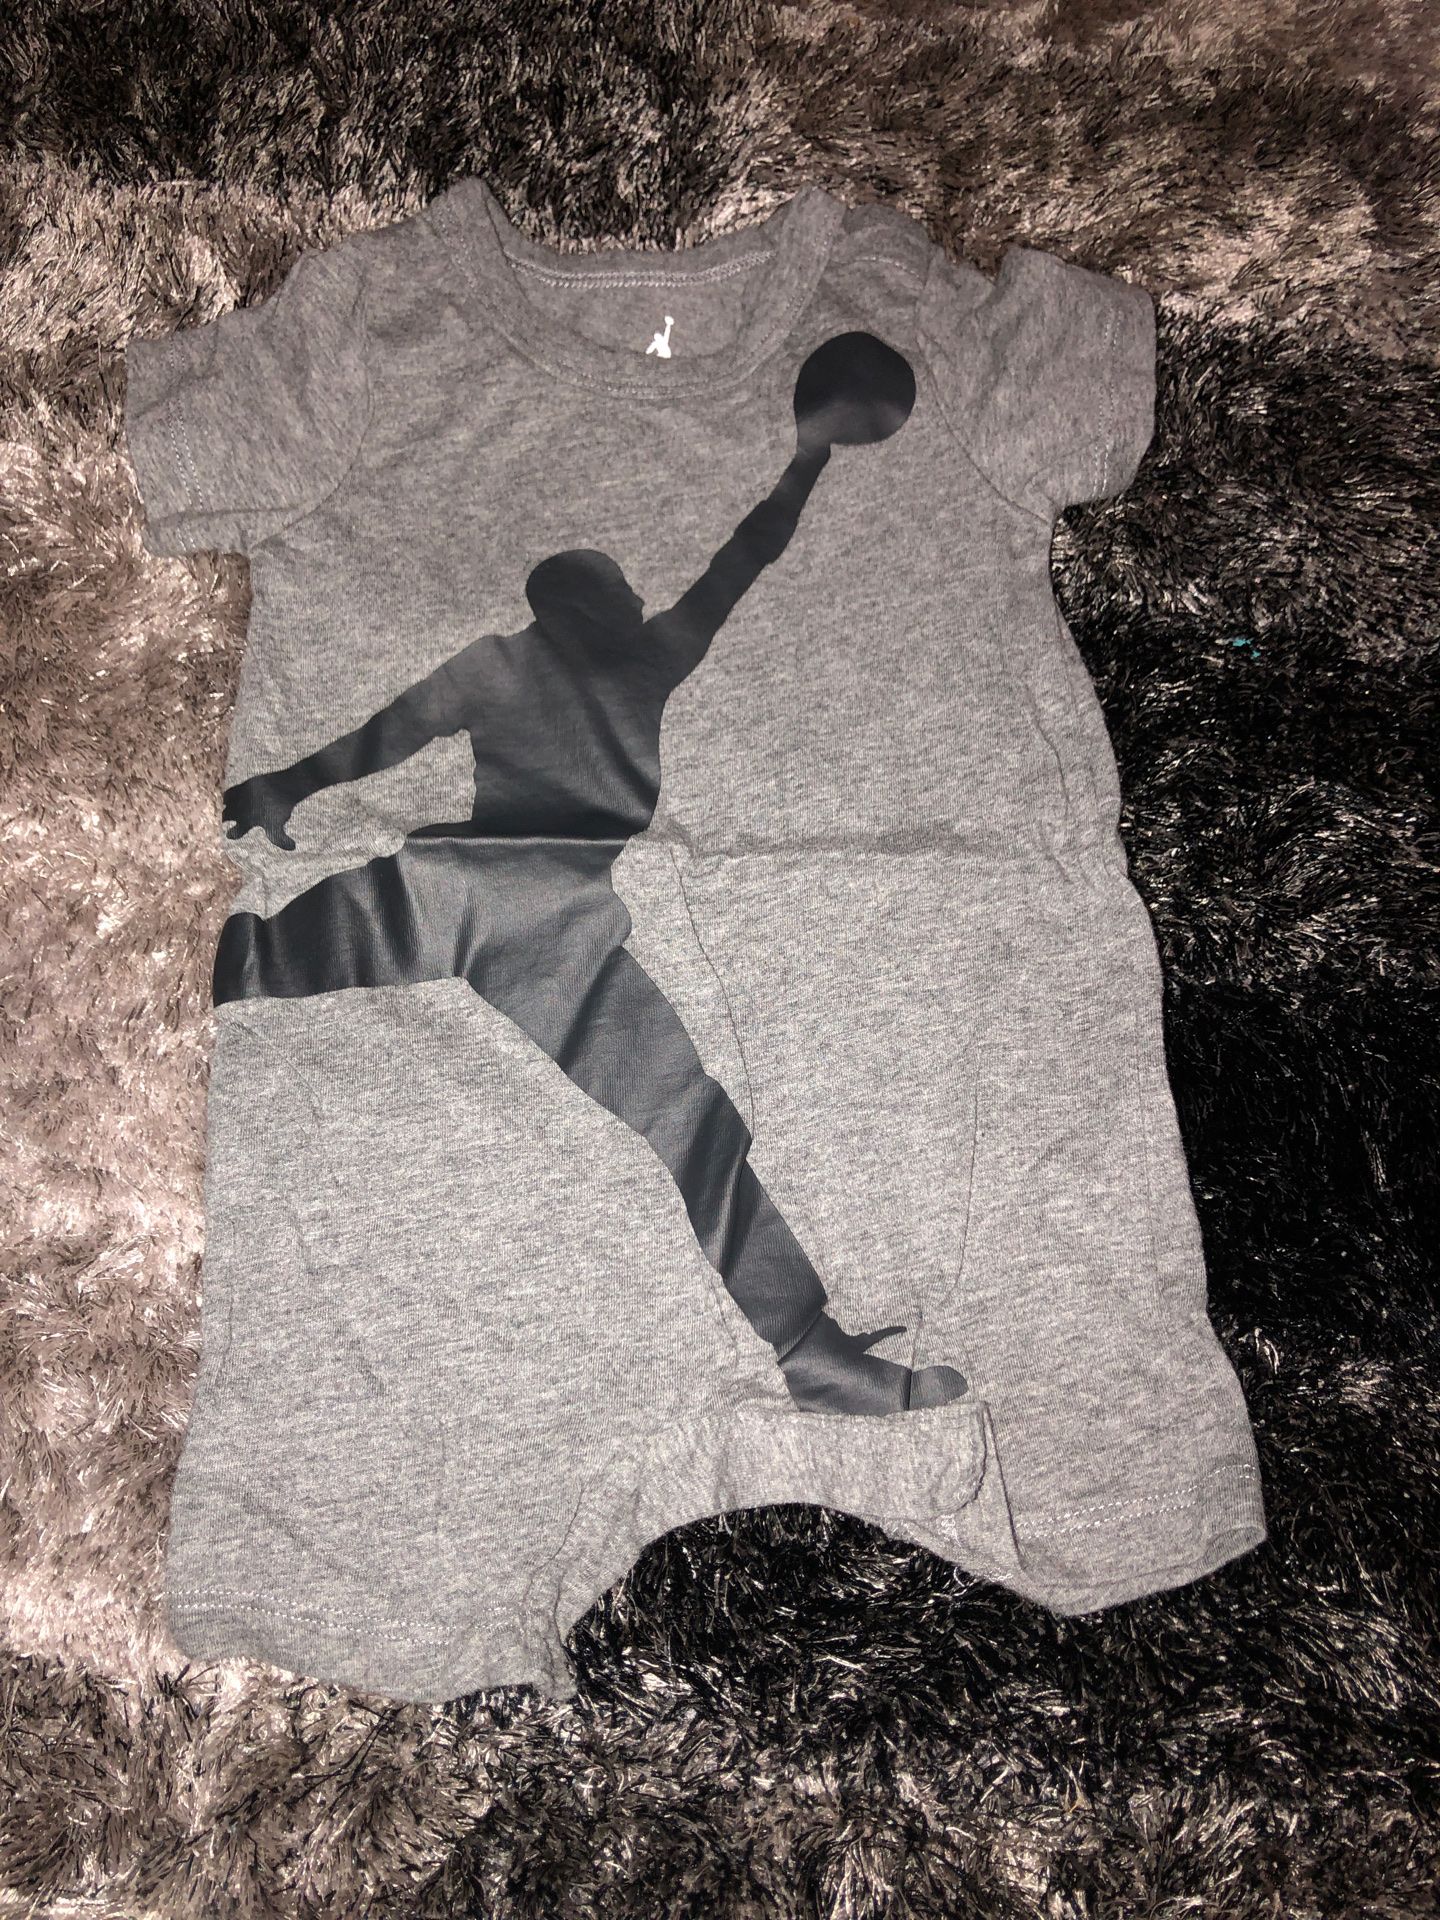 Jordan and nike baby boy outfits